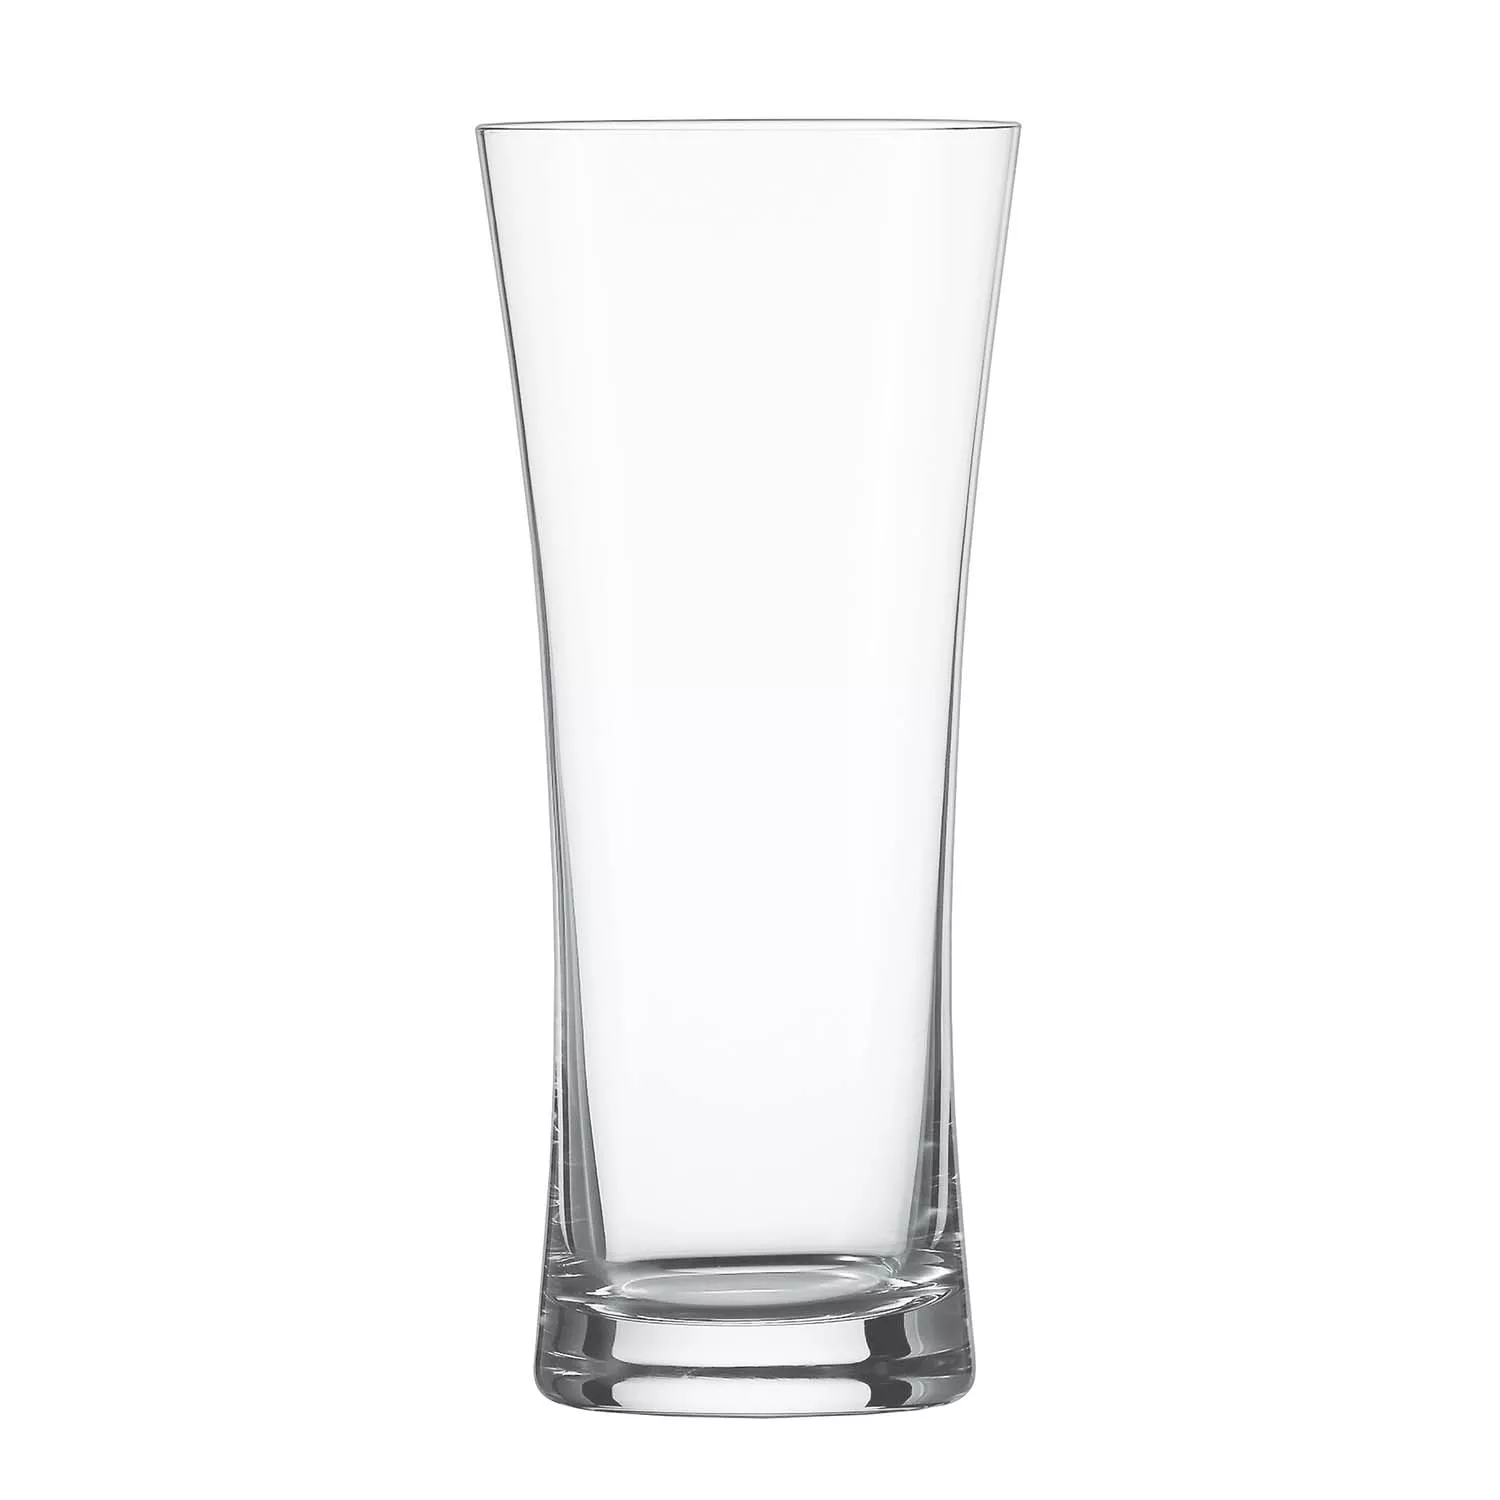 ZWIESEL GLAS Classico Lager Beer Glasses - Set of 6